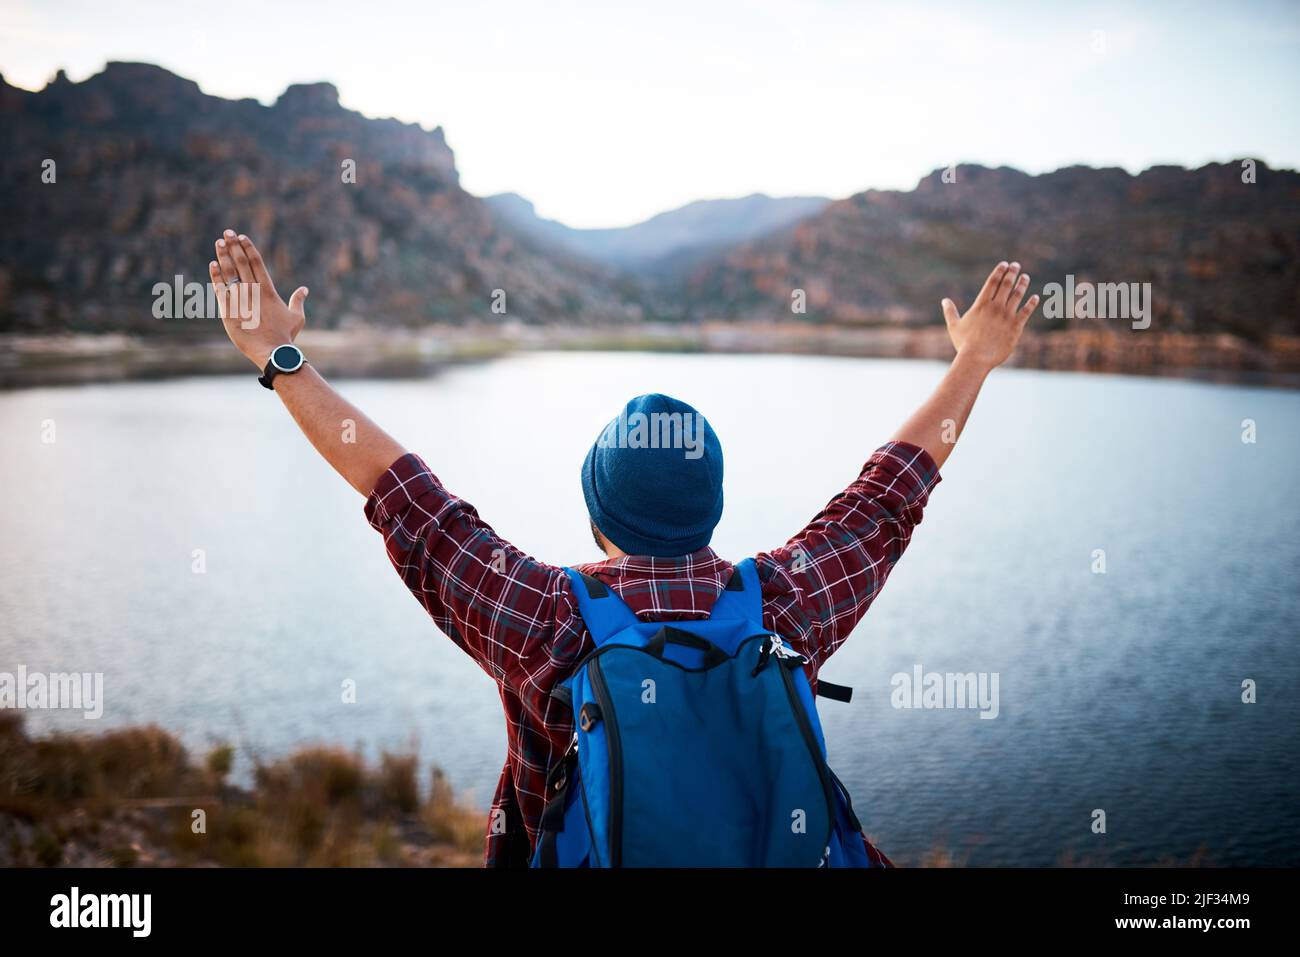 An unidentified man raises his arms at lake view while backpacking mountains Stock Photo